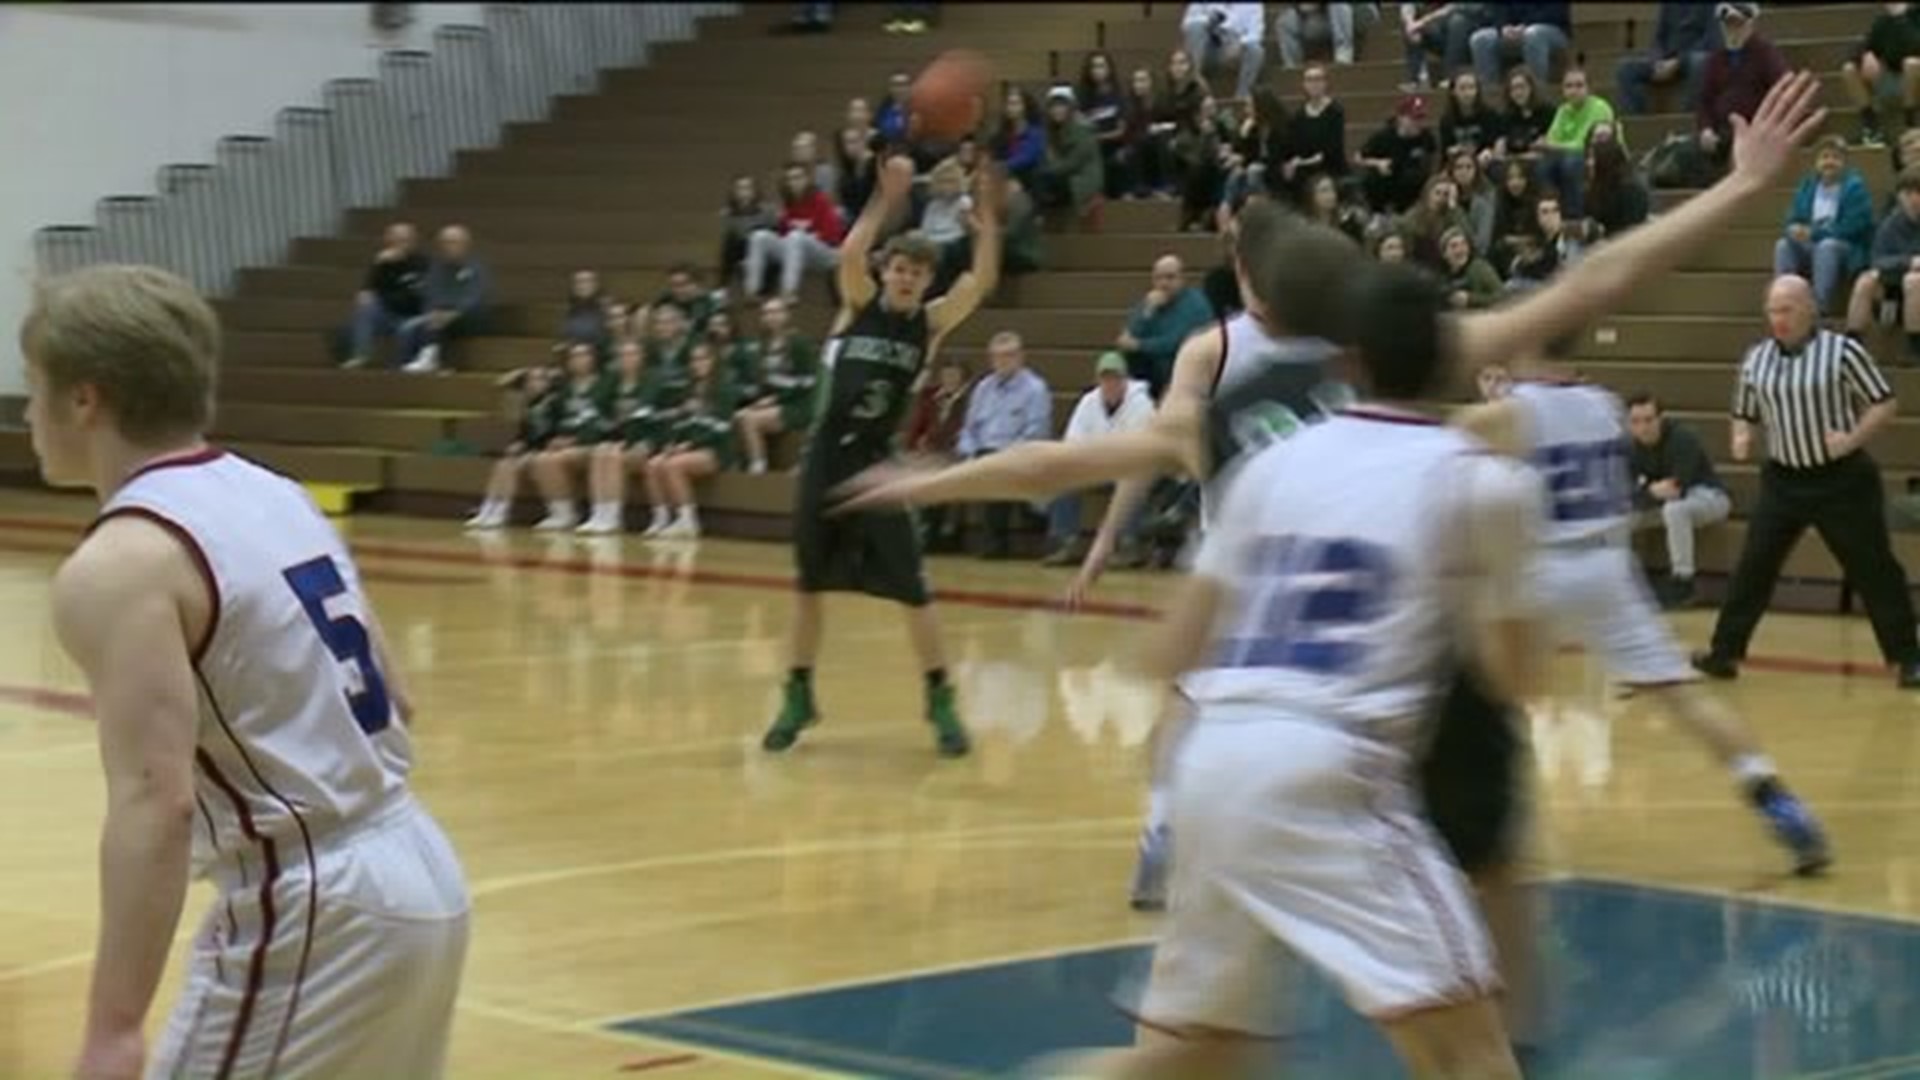 Holy Cross Boys Beat Dunmore, Advance To First Half Title